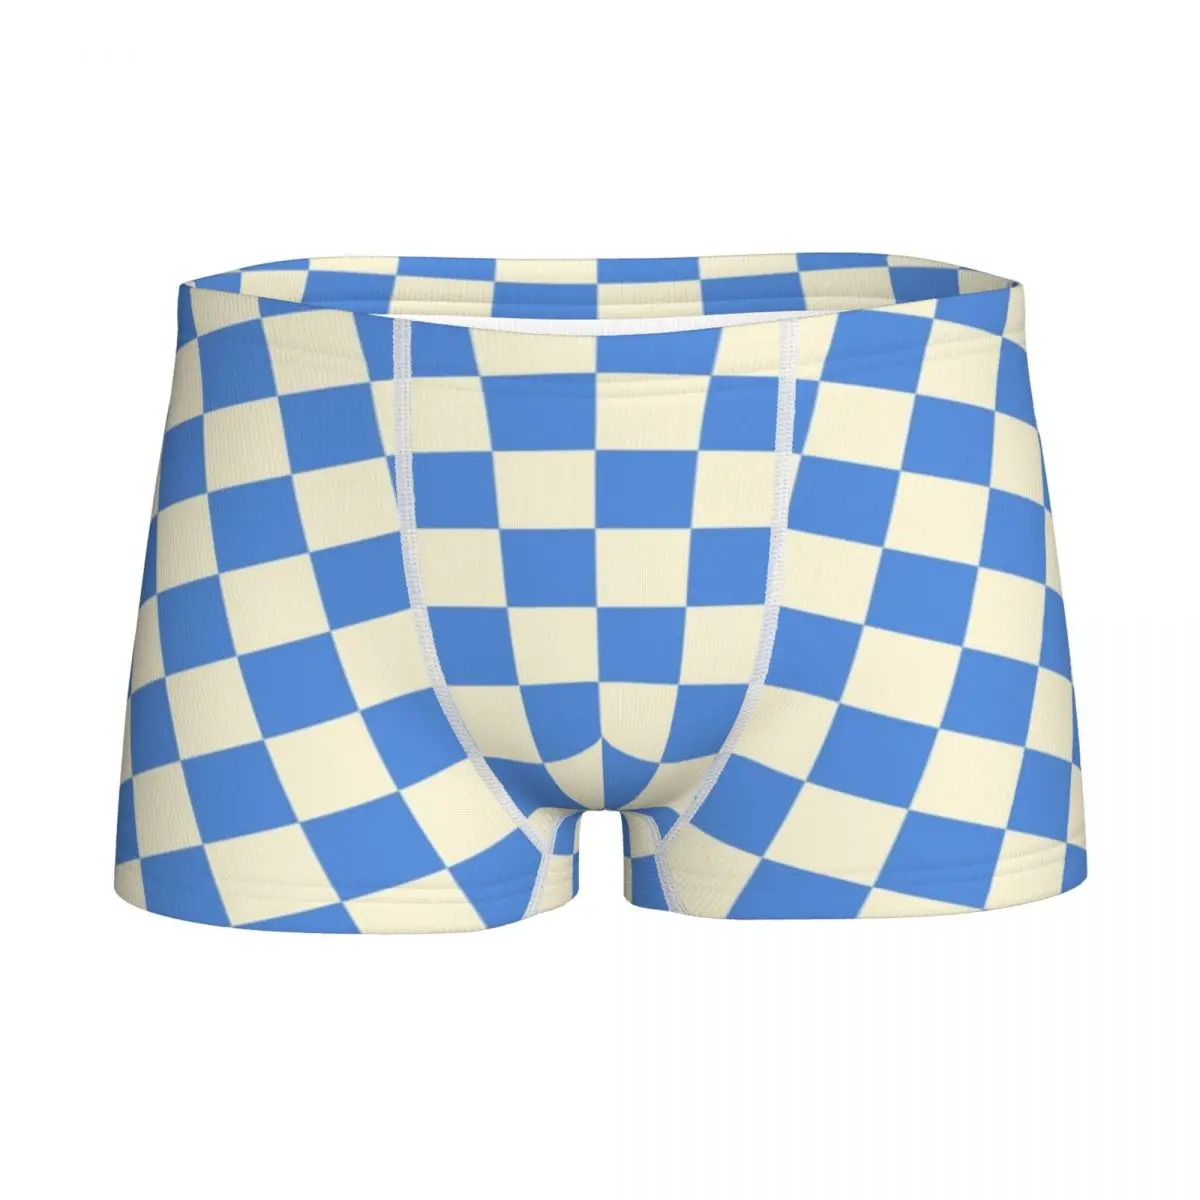 

Boys Blue Checkerboard Print Boxer Shorts Cotton Young Soft Underwear Checkered Children's Panties Pop Teenagers Underpants